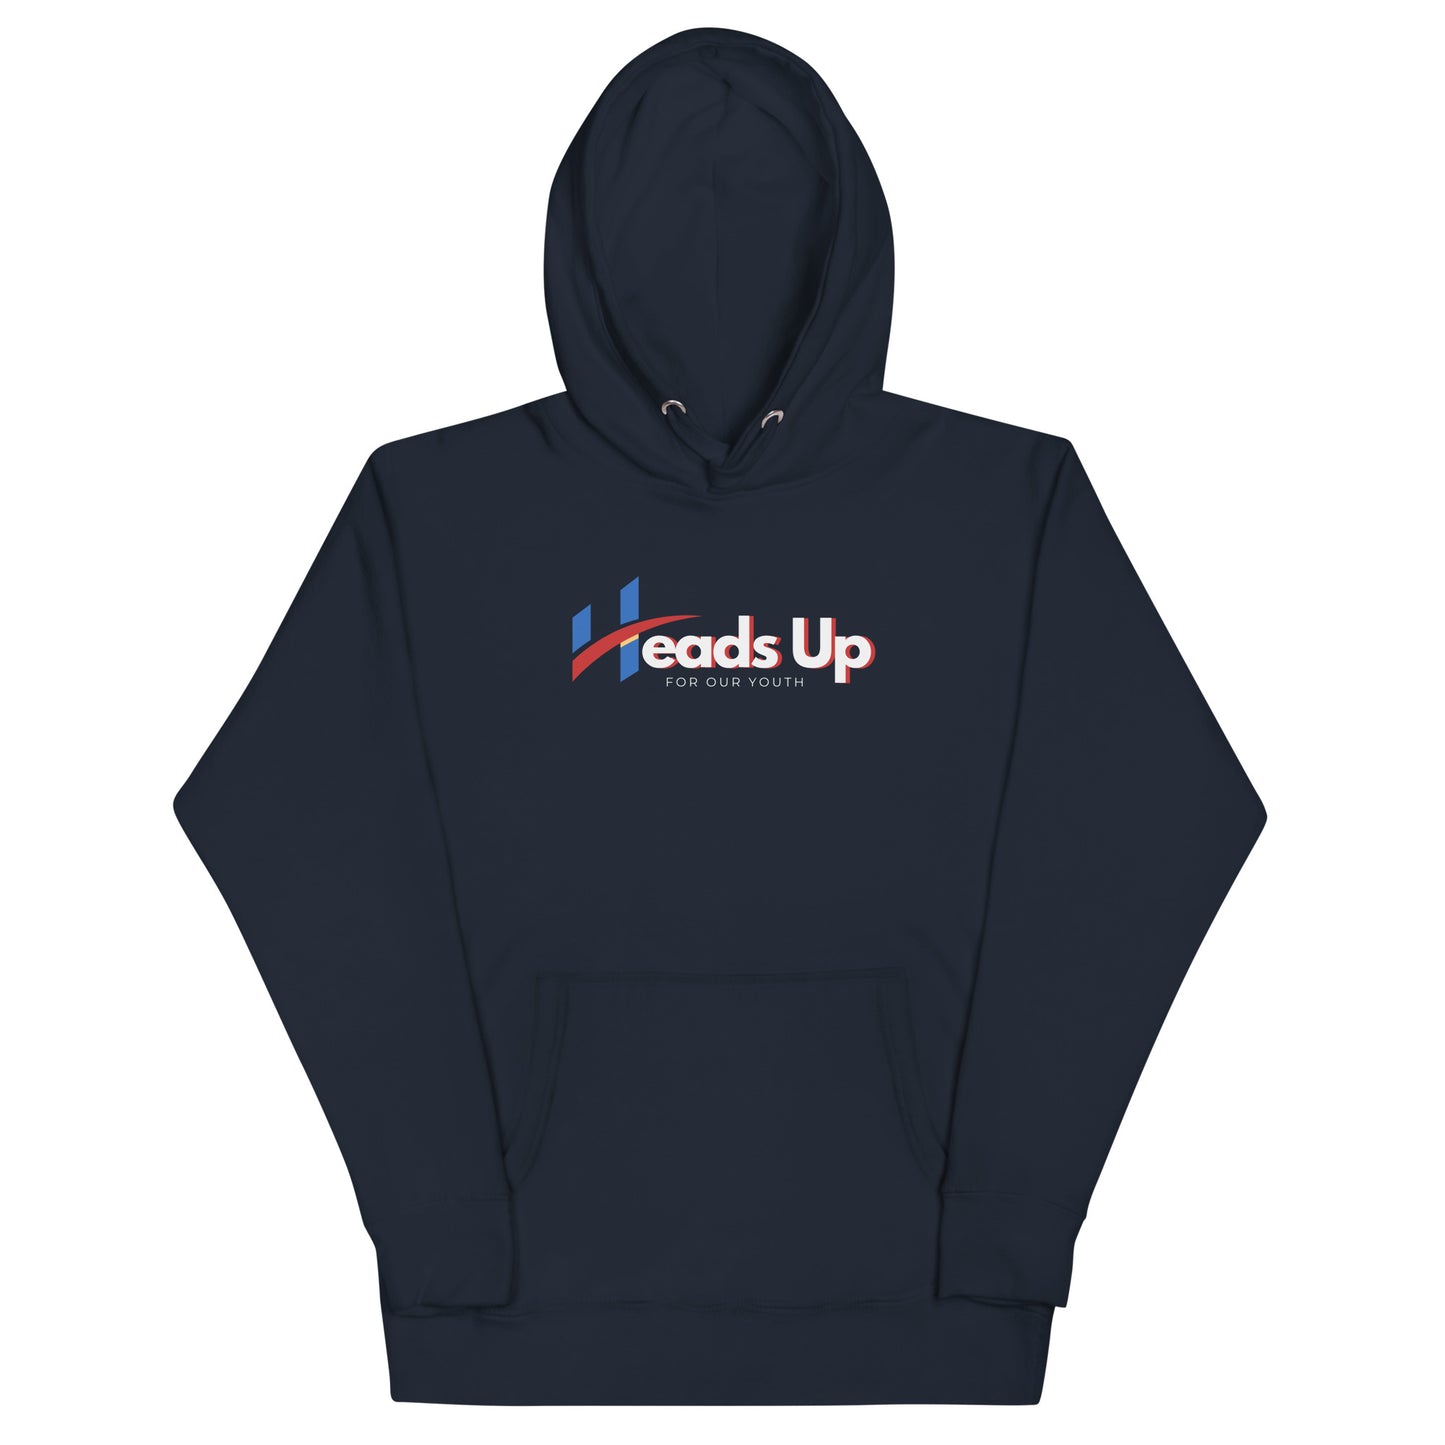 Heads Up For Our Youth Unisex Hoodie